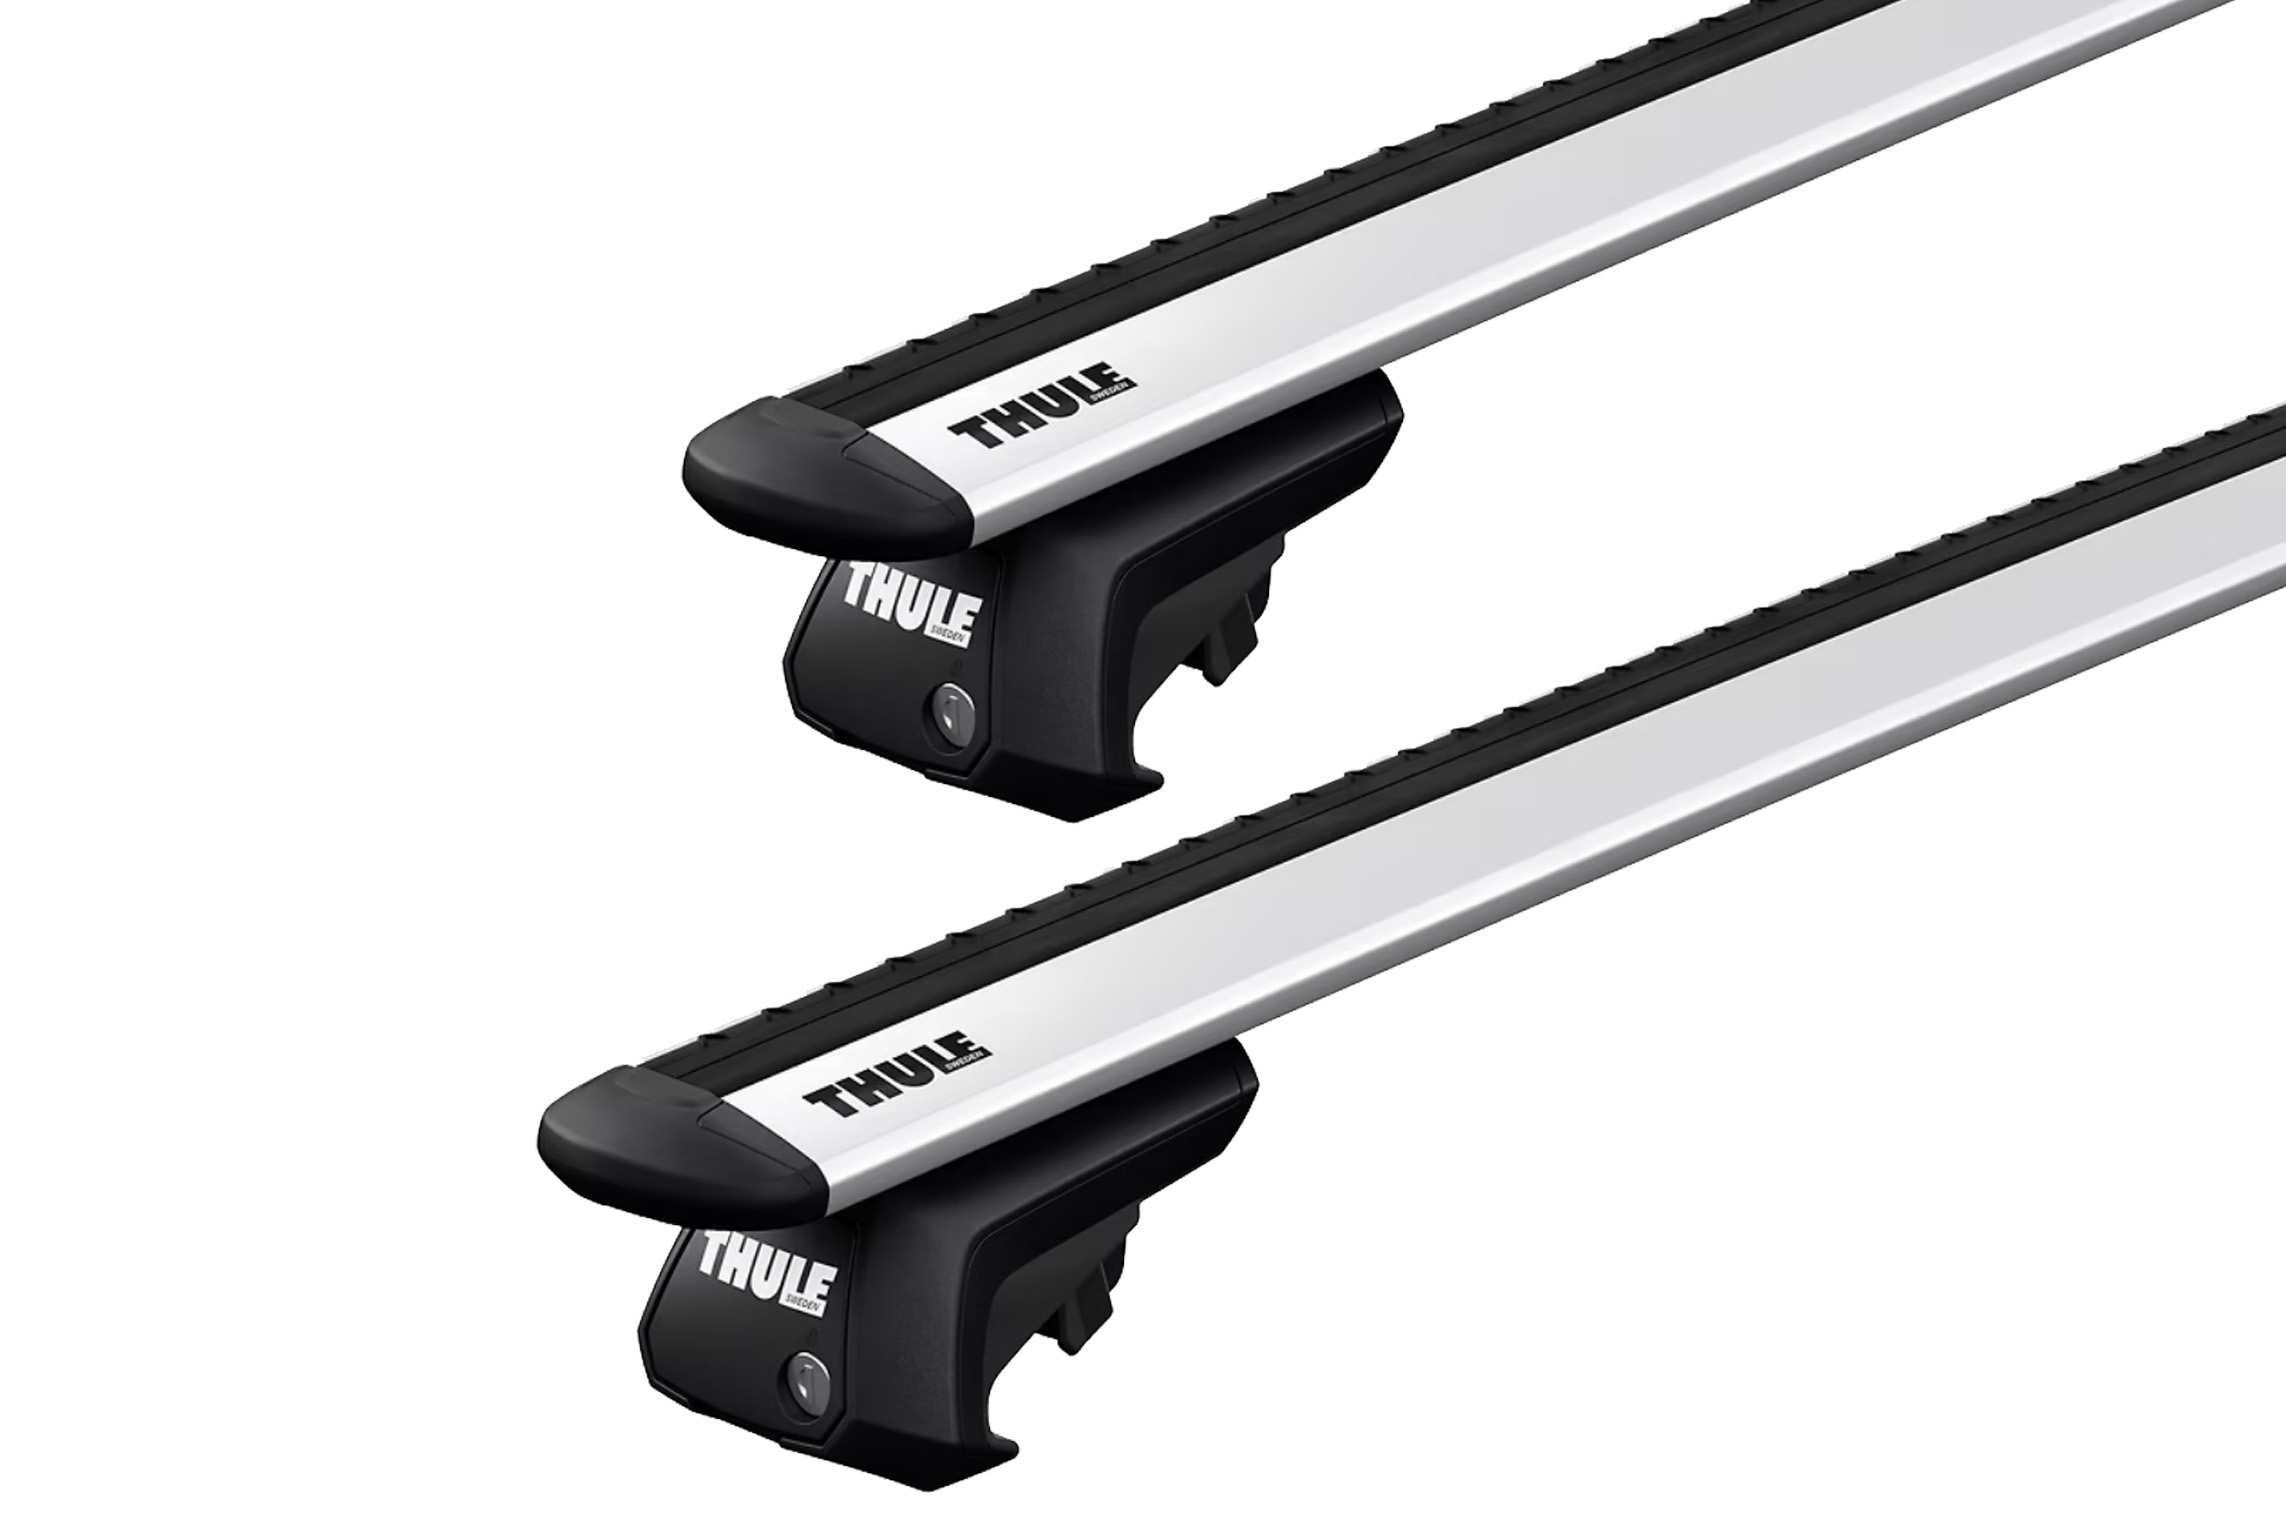 Thule WingBar Evo Silver 2 Bar Roof Rack for Subaru Forester SH 5dr SUV with Raised Roof Rail (2008 to 2012) - Raised Rail Mount